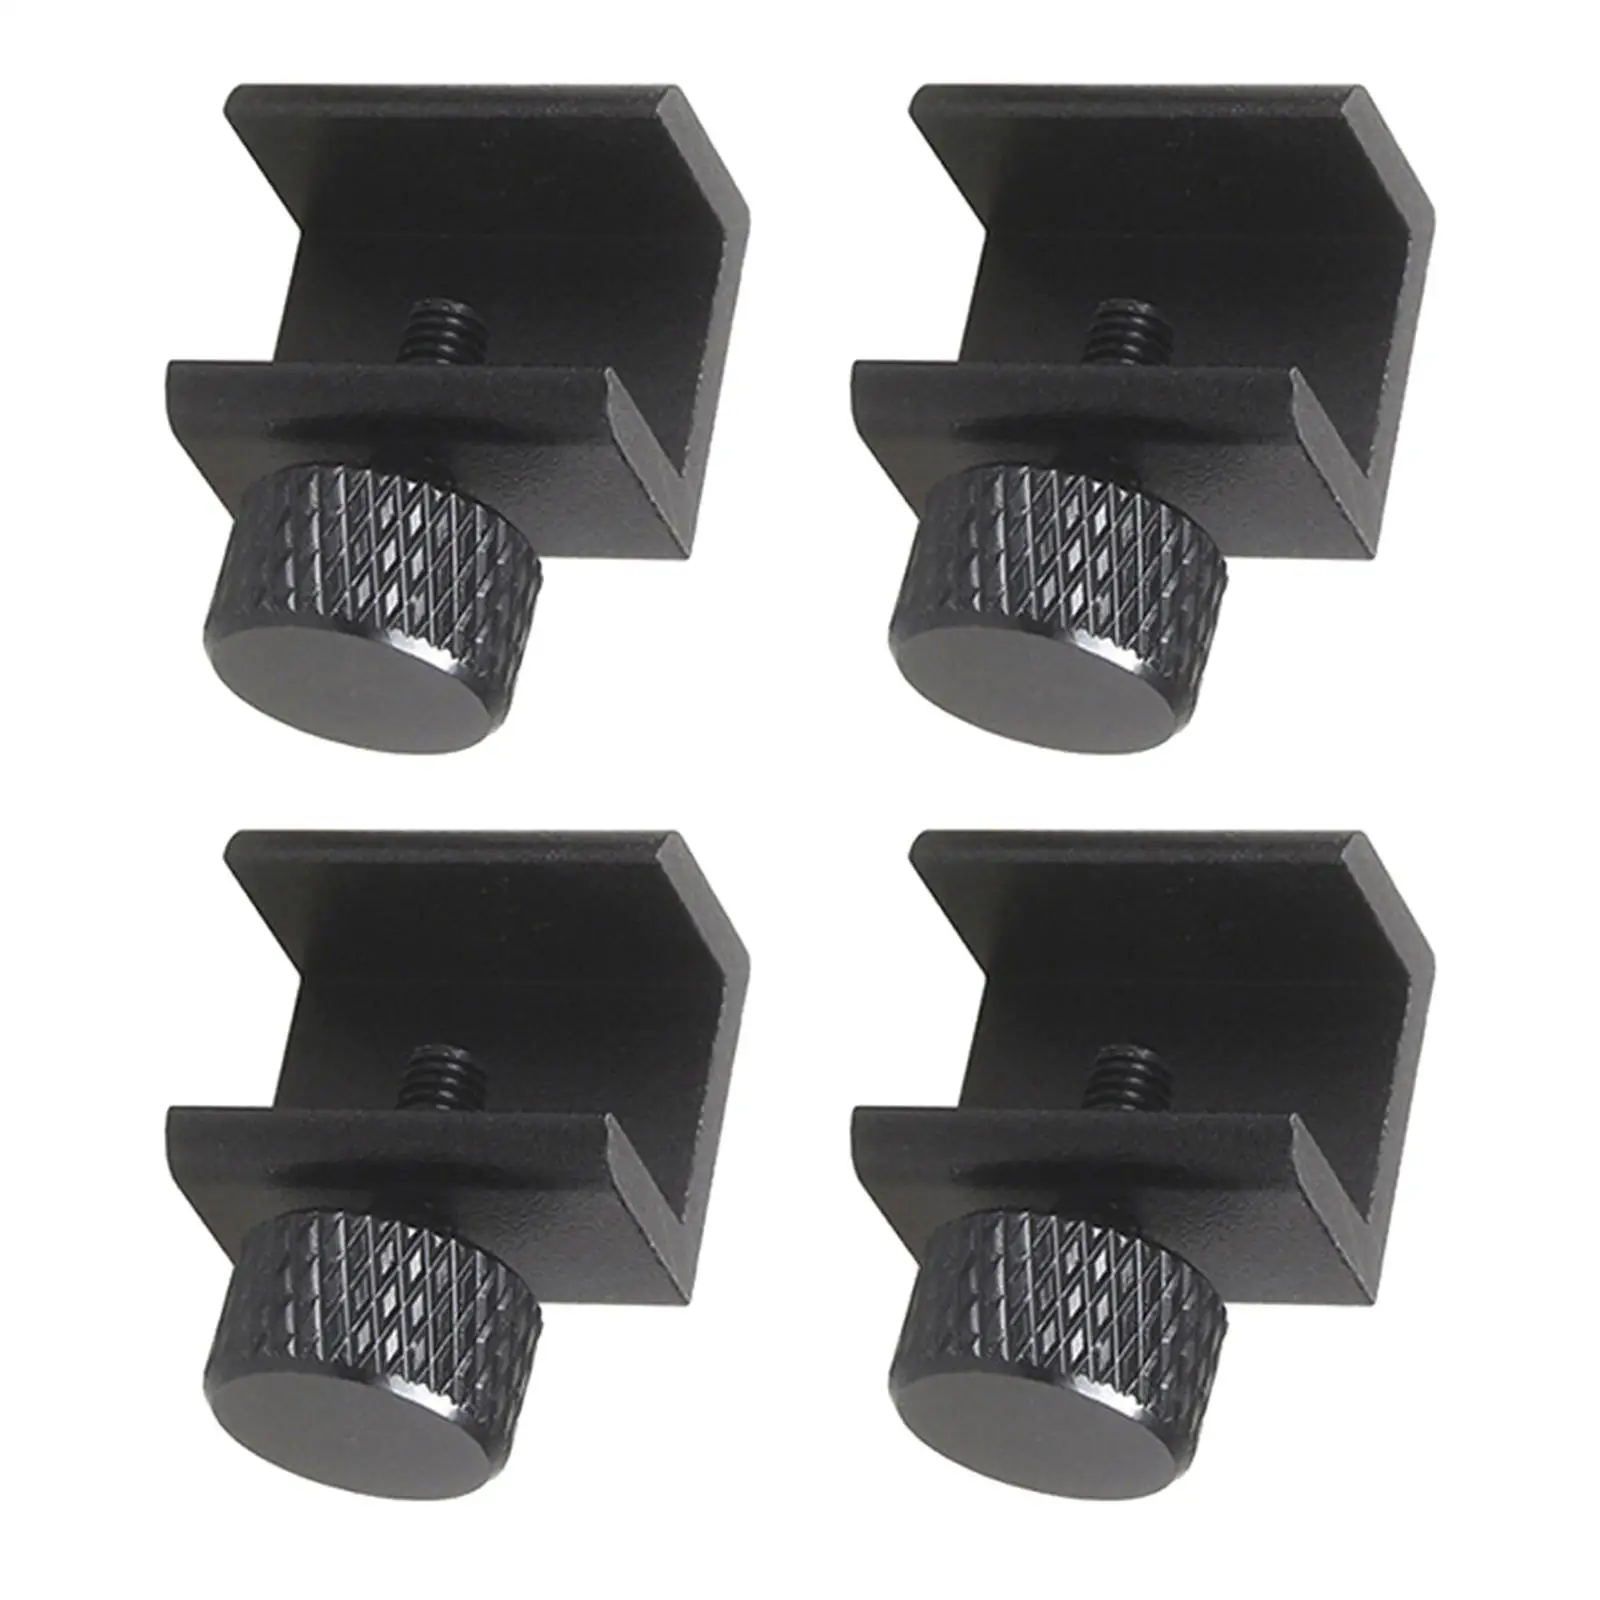 4 Pieces 3D Printer Heat Bed Fixed Clips Replace Good Performance Universal 3D Printer Glass Bed Clips 3D printer Supplies